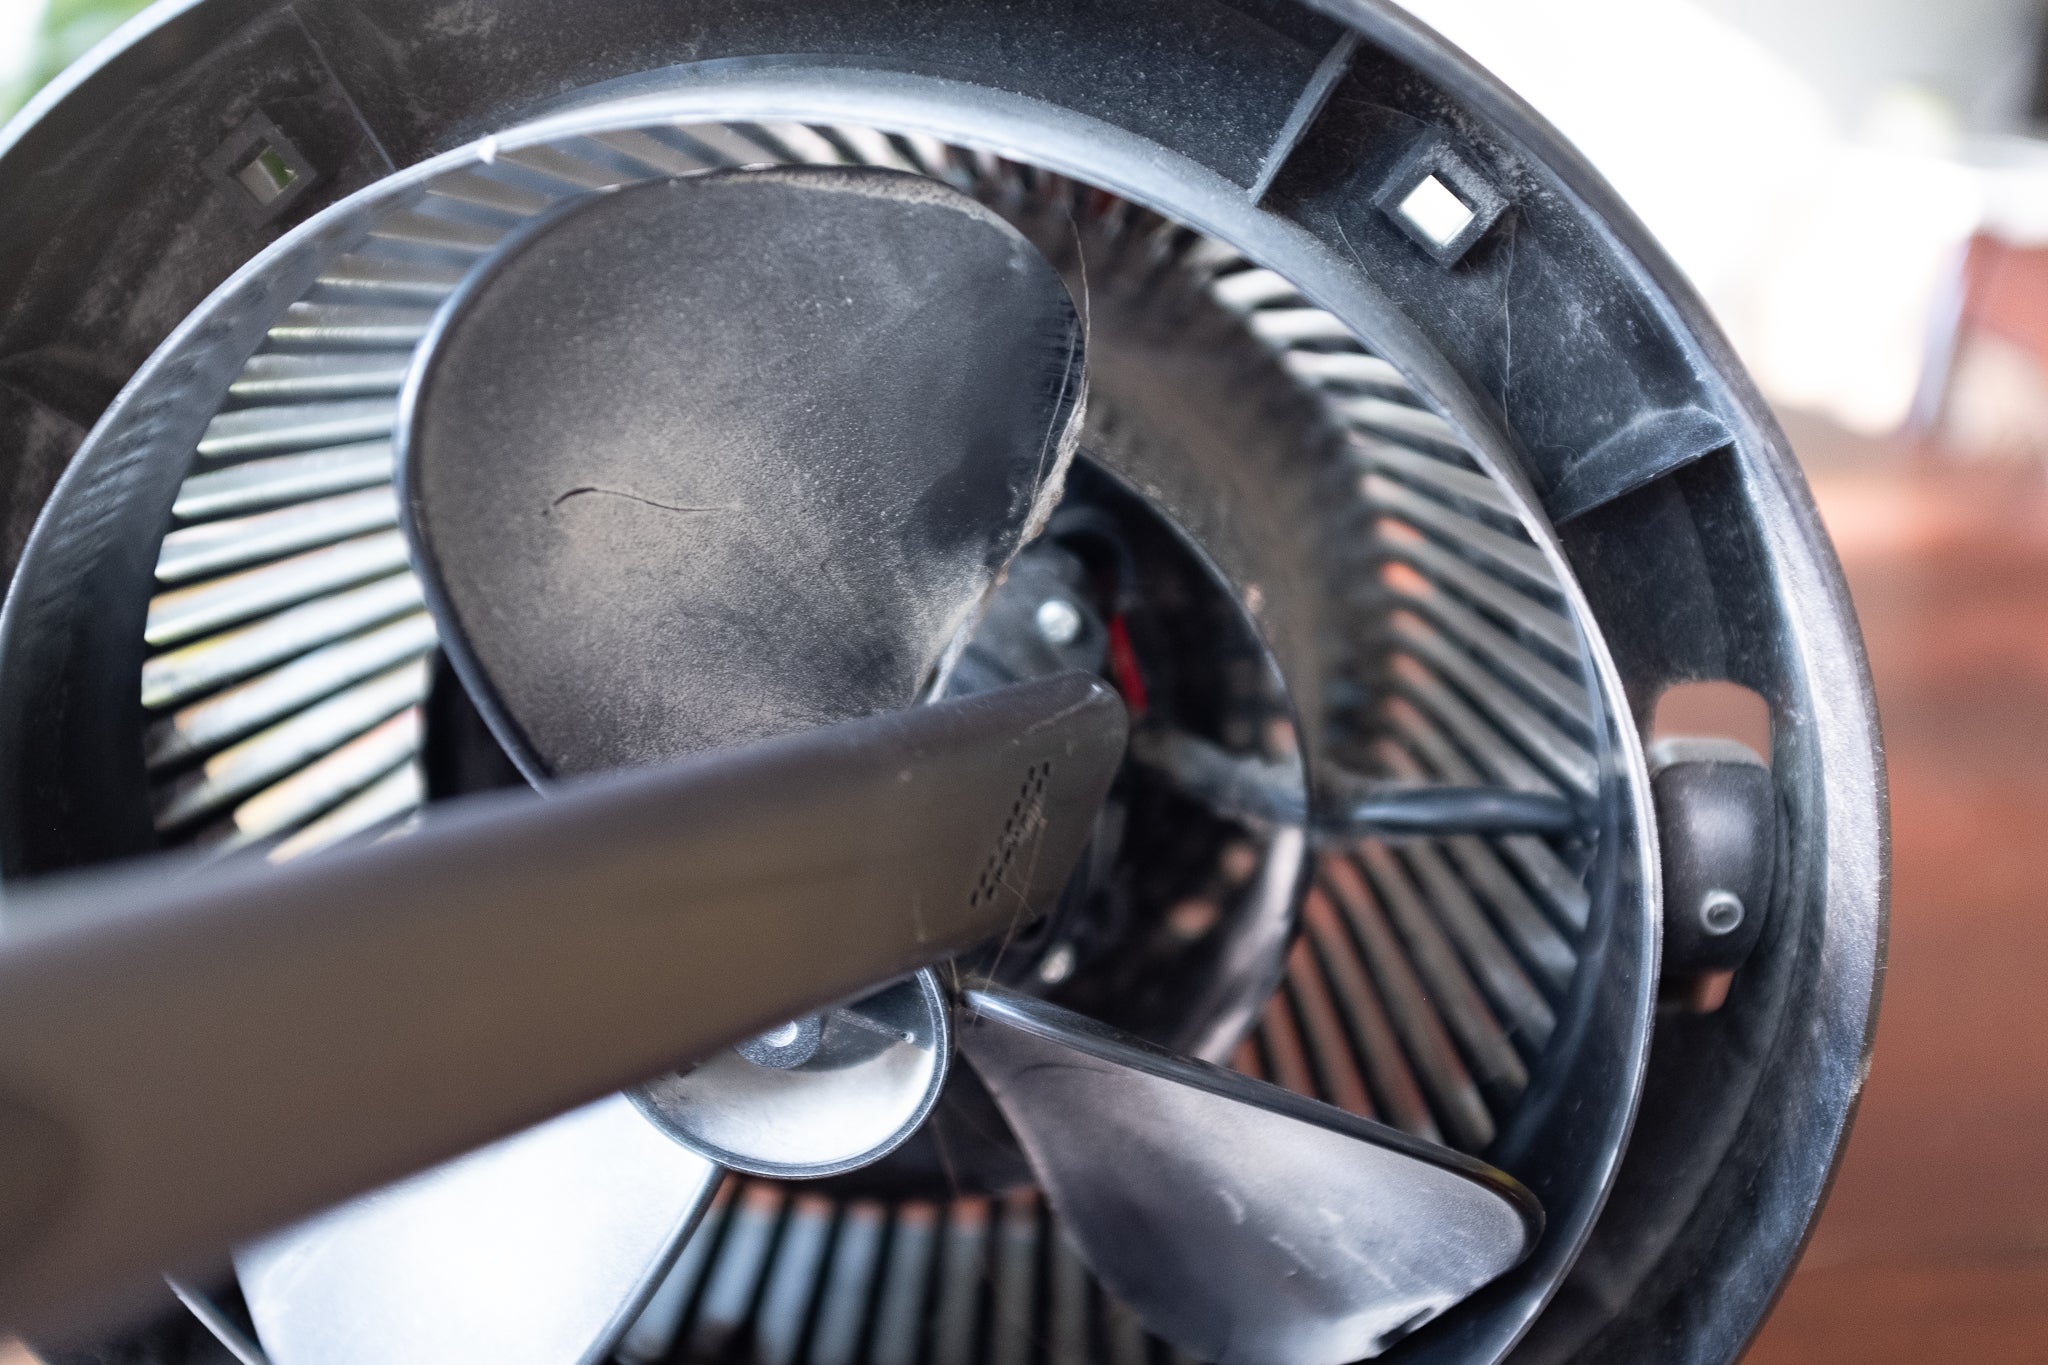 Check if all fans are working properly
Clean any dust or debris from the cooling system